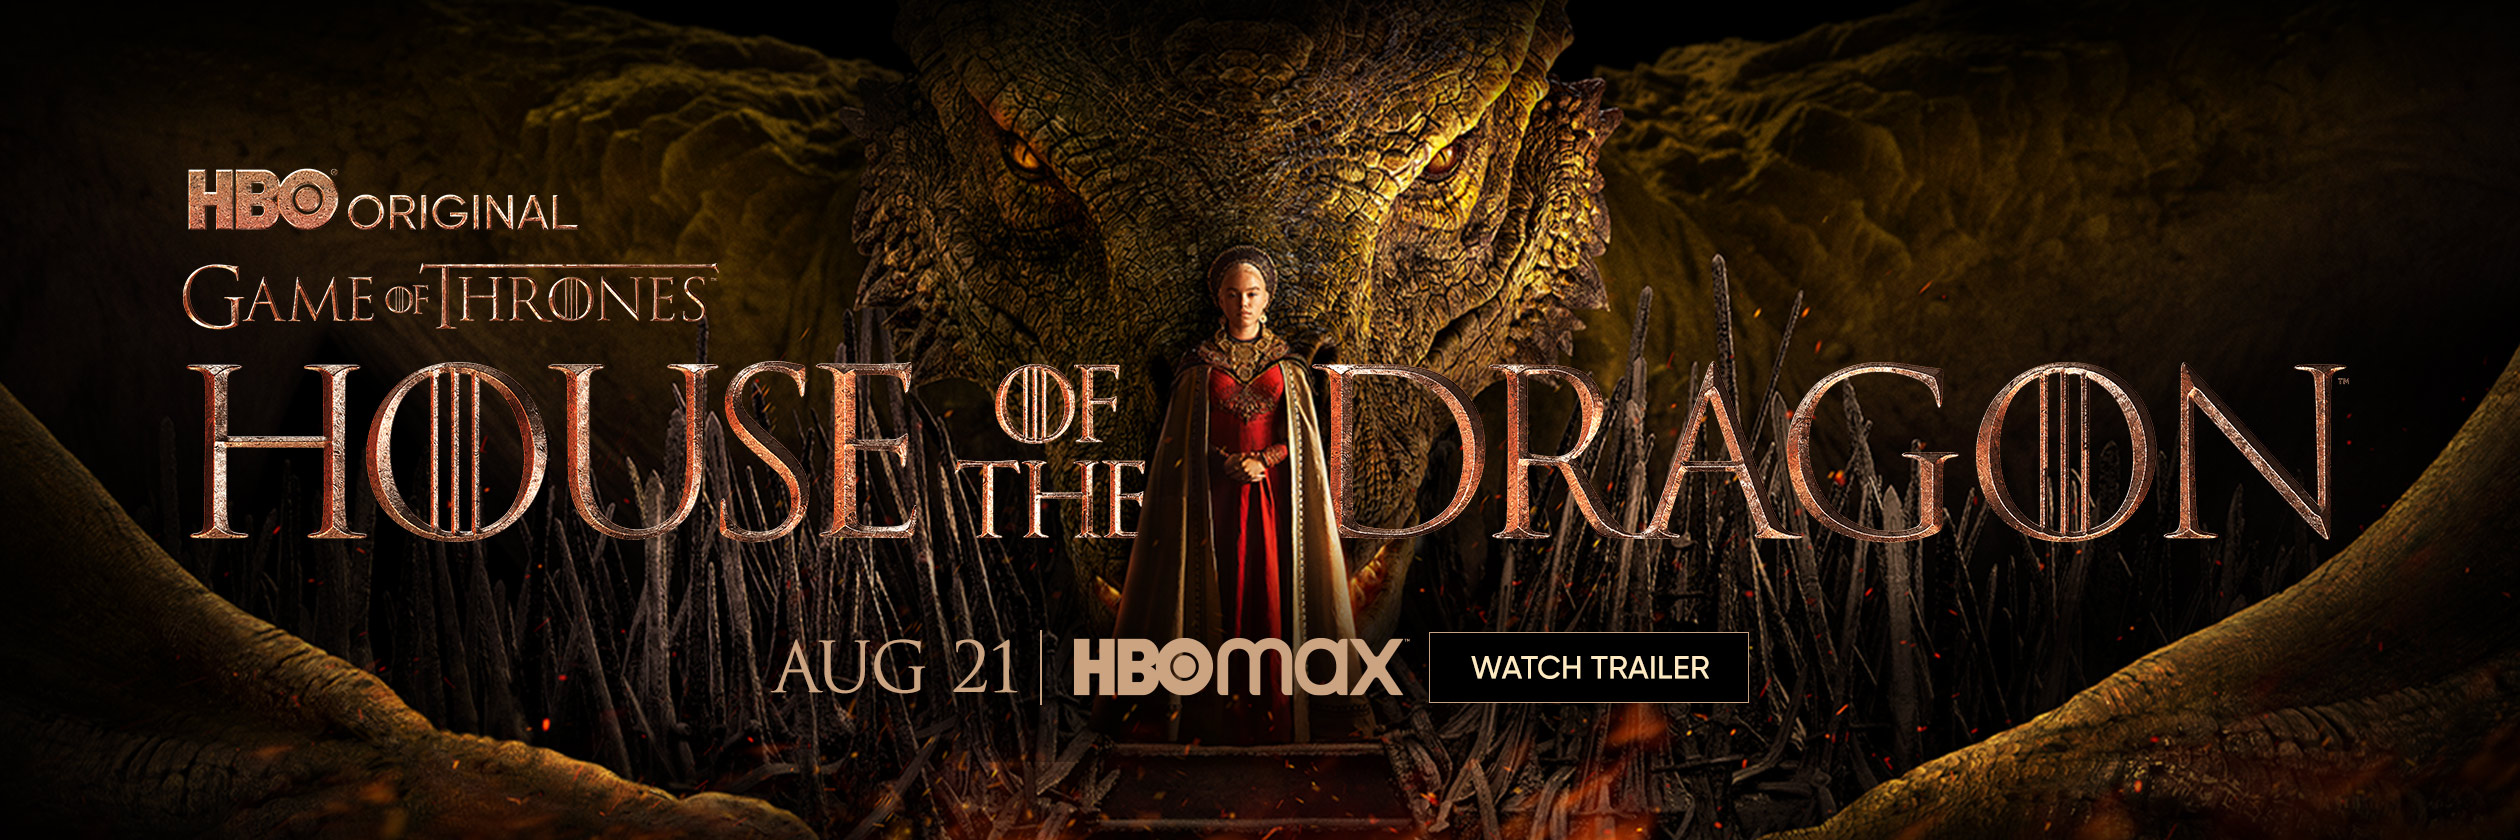 HBO Original Game of Thrones: House of the Dragon. Coming August 21 on HBOMax. Watch the Trailer.